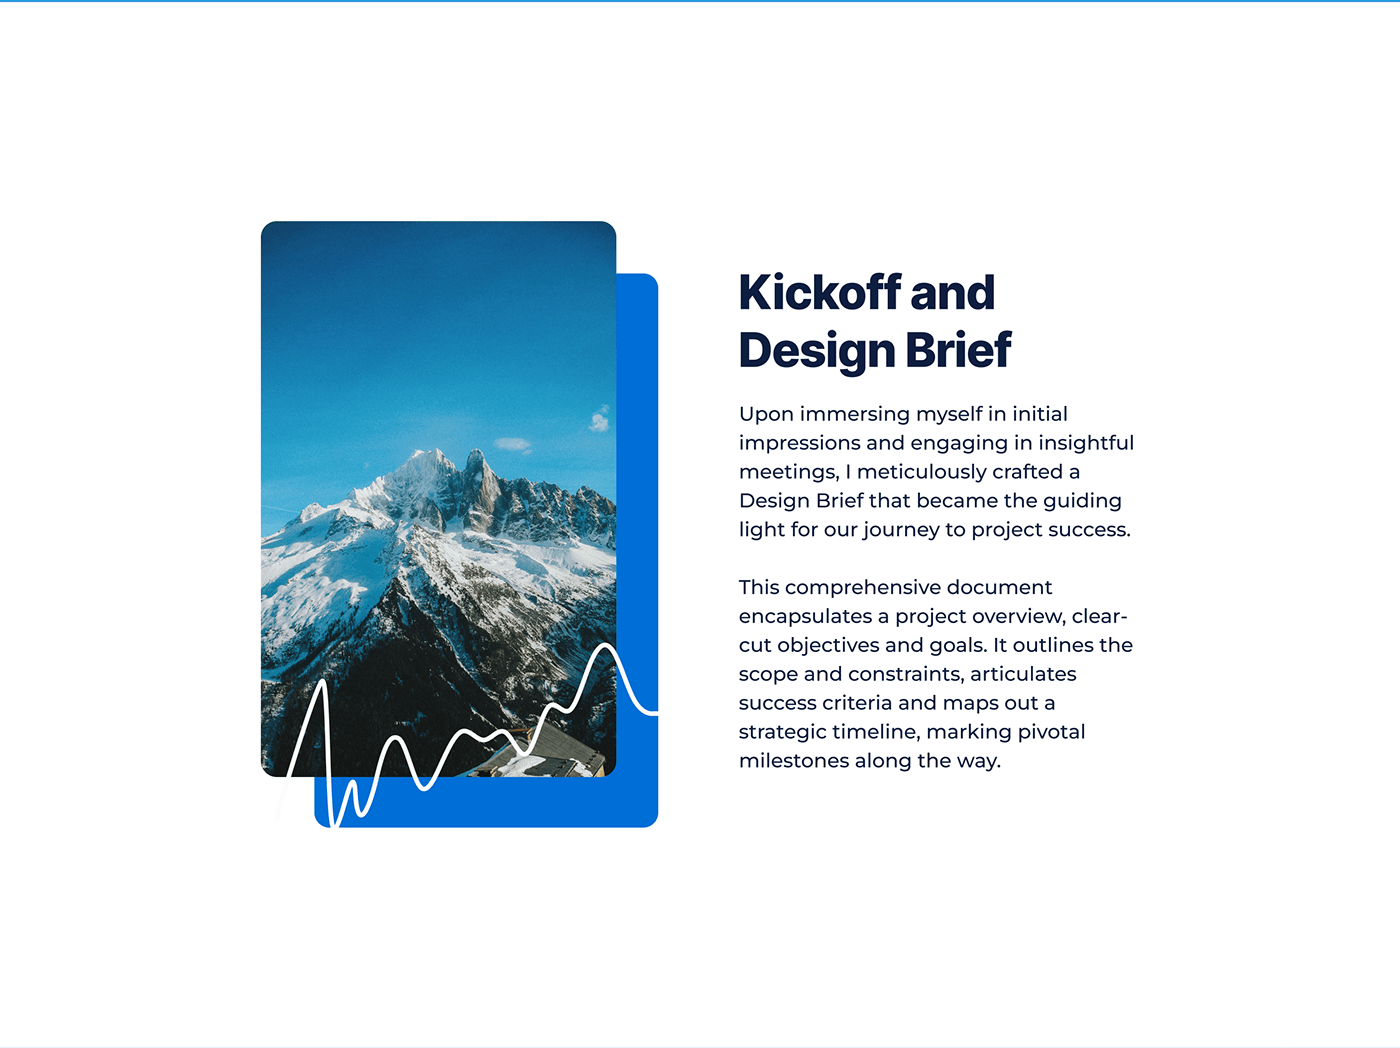 A summary about the Kickoff and Design Brief